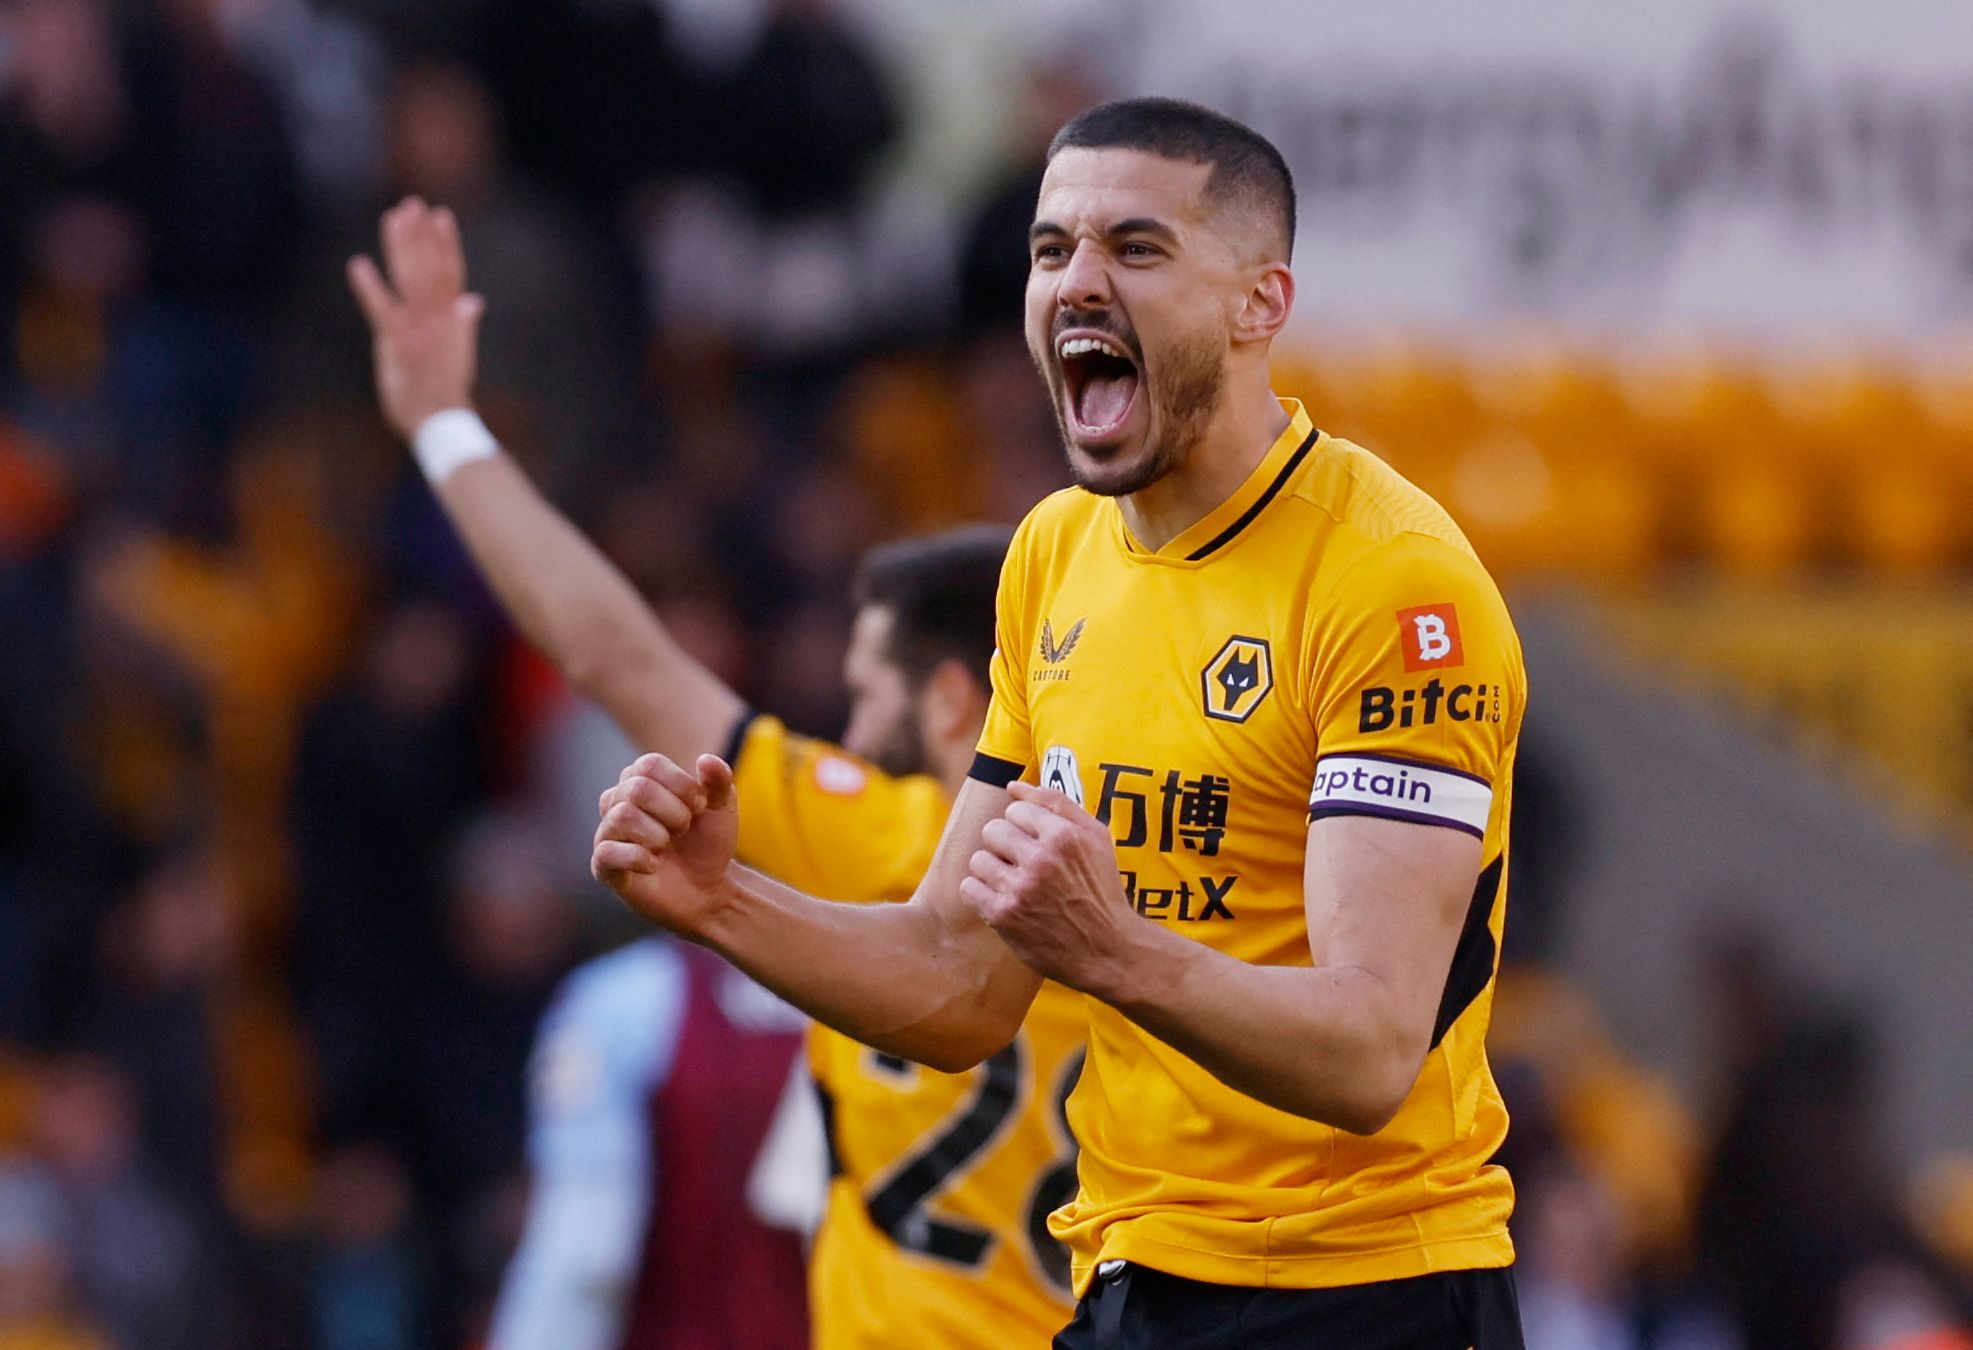 Soccer Football - Premier League - Wolverhampton Wanderers v Aston Villa - Molineux Stadium, Wolverhampton, Britain - April 2, 2022 Wolverhampton Wanderers' Conor Coady celebrates after the match Action Images via Reuters/Andrew Couldridge EDITORIAL USE ONLY. No use with unauthorized audio, video, data, fixture lists, club/league logos or 'live' services. Online in-match use limited to 75 images, no video emulation. No use in betting, games or single club /league/player publications.  Please con